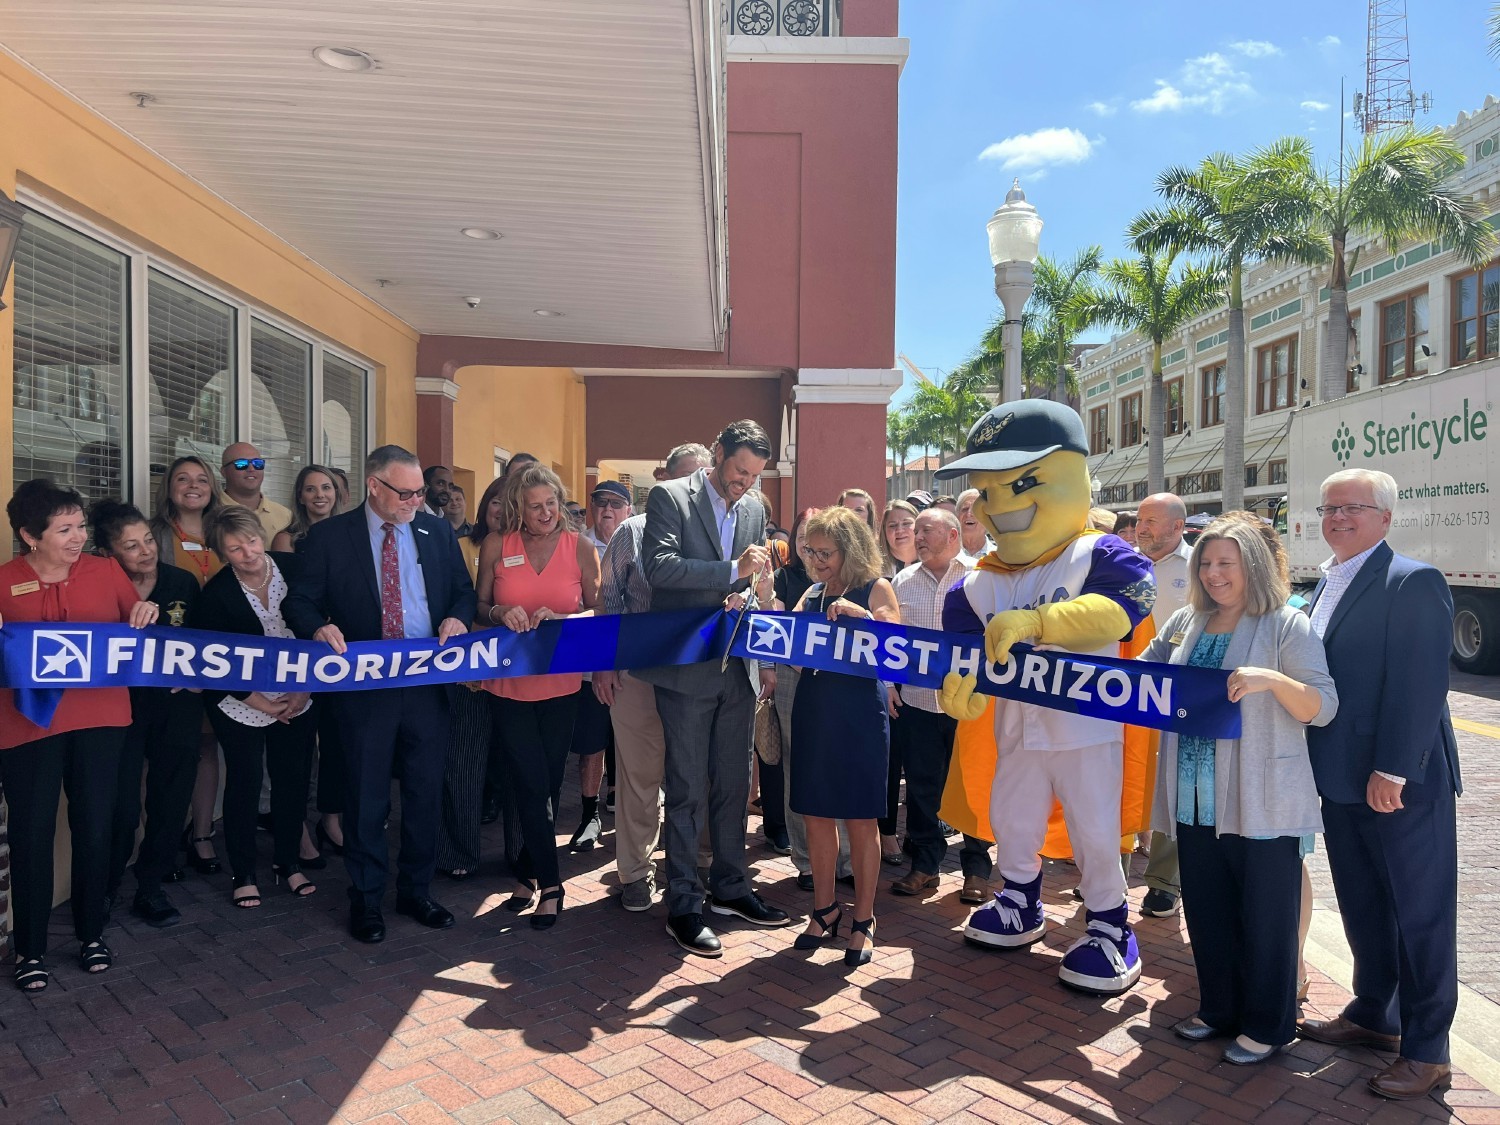 Associates and members of the community celebrate the re-opening of a First Horizon location impacted by Hurricane Ian.